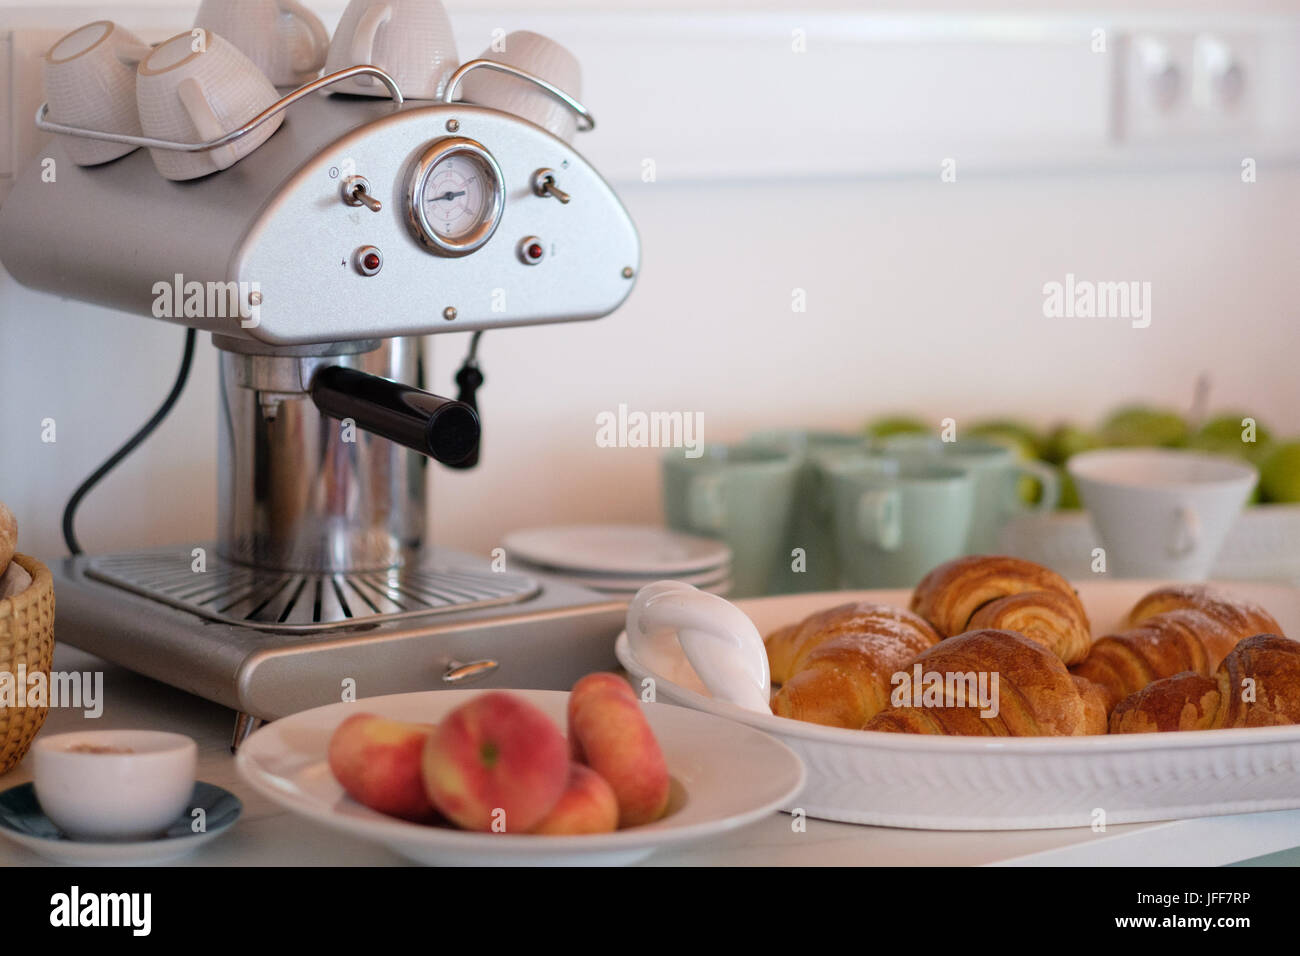 Breakfast table with vintage coffee maker Stock Photo